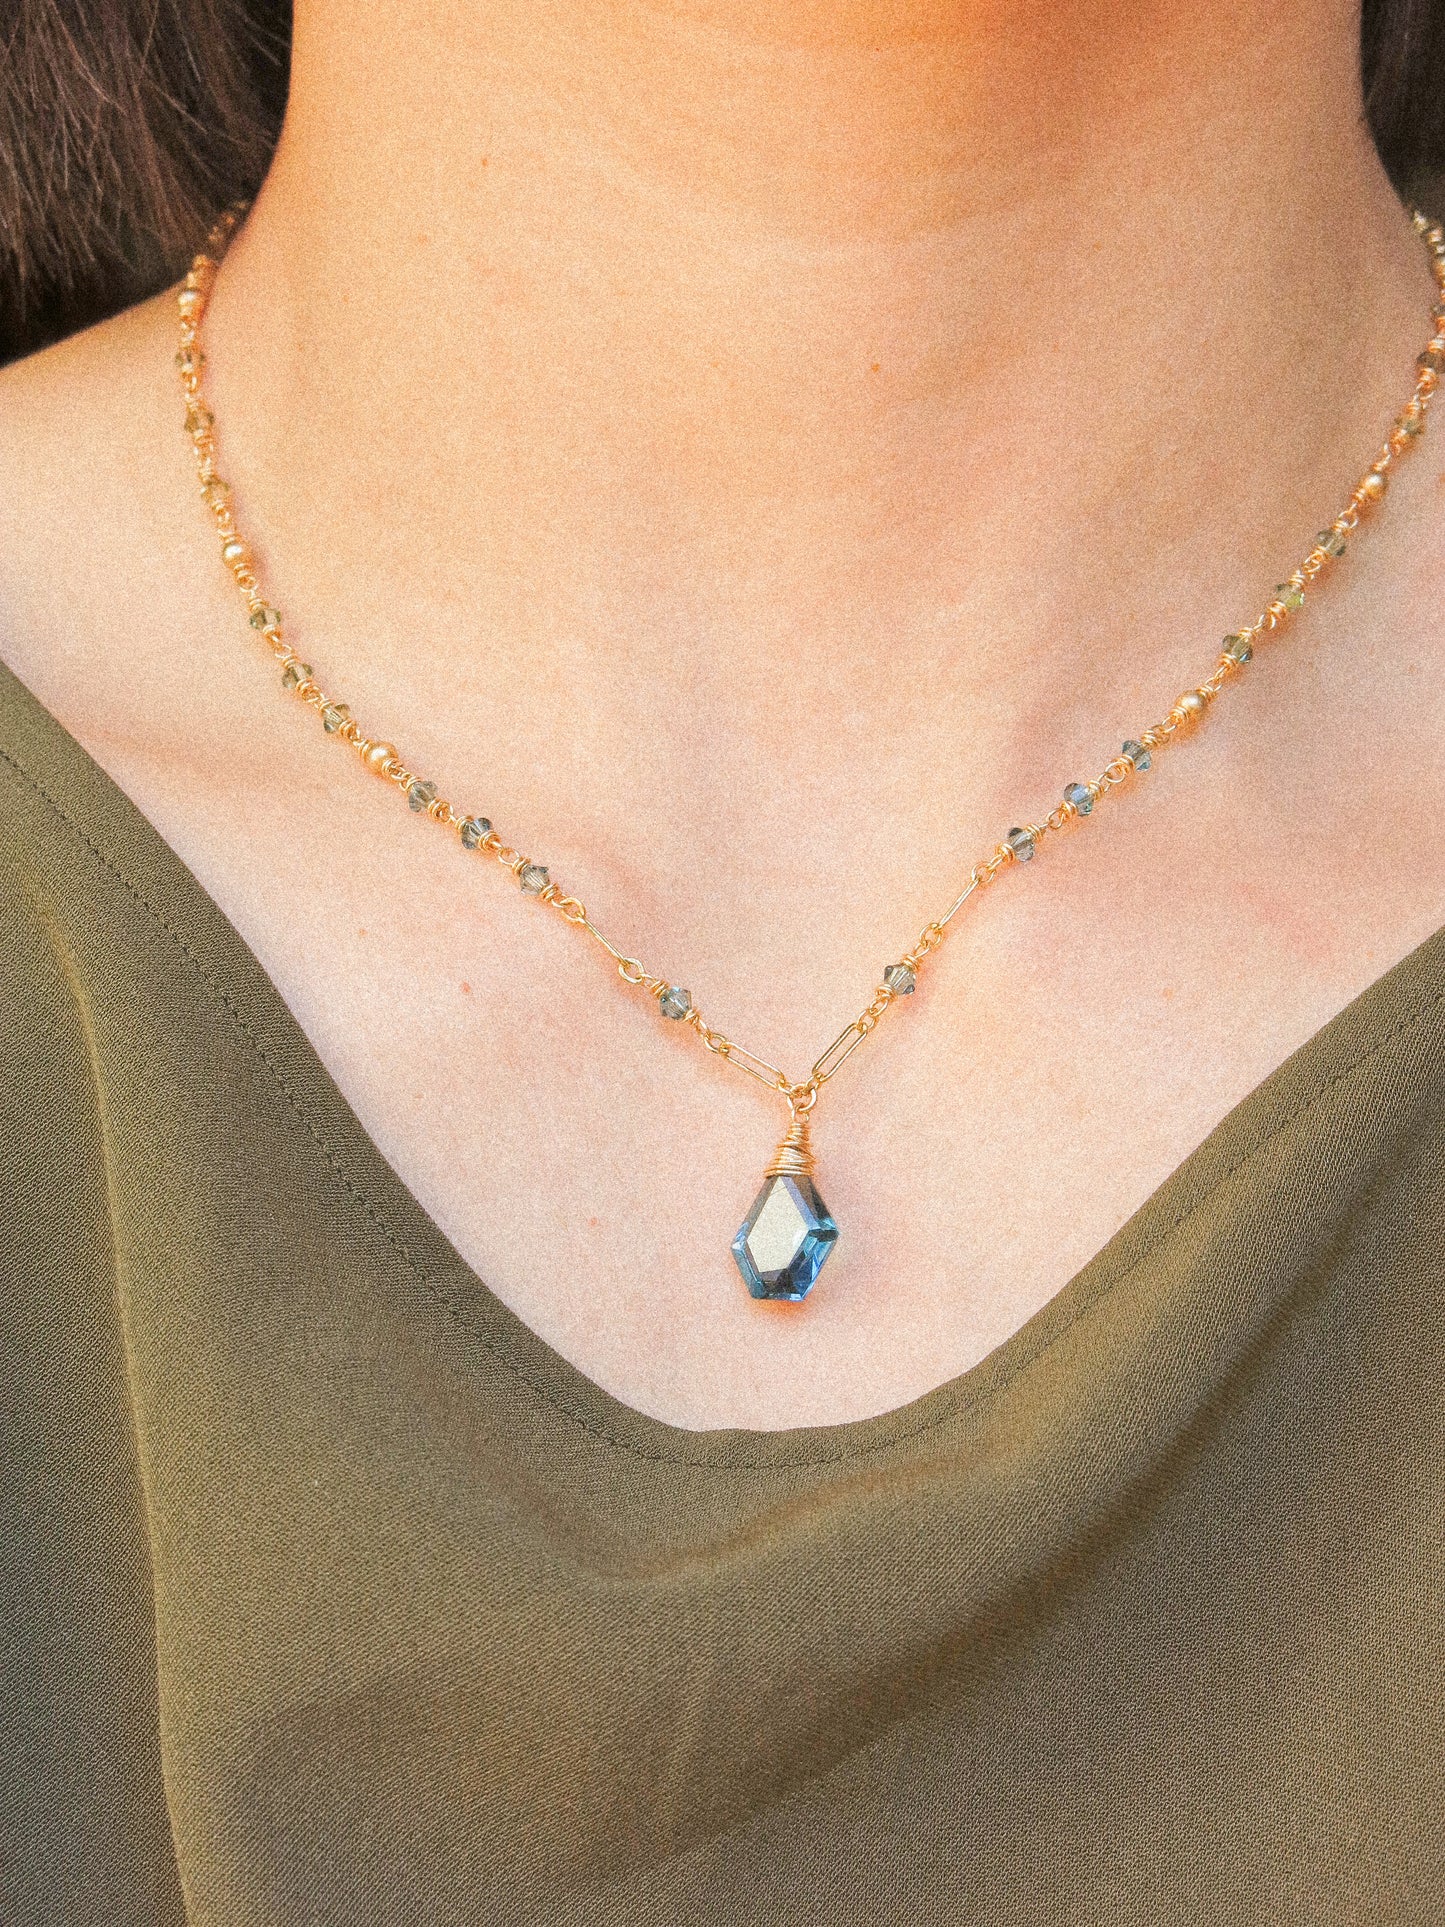 Geometric London Blue Topaz Necklace with Ombré Swarovski and Satin Gold Fill Bead Delicate Chain